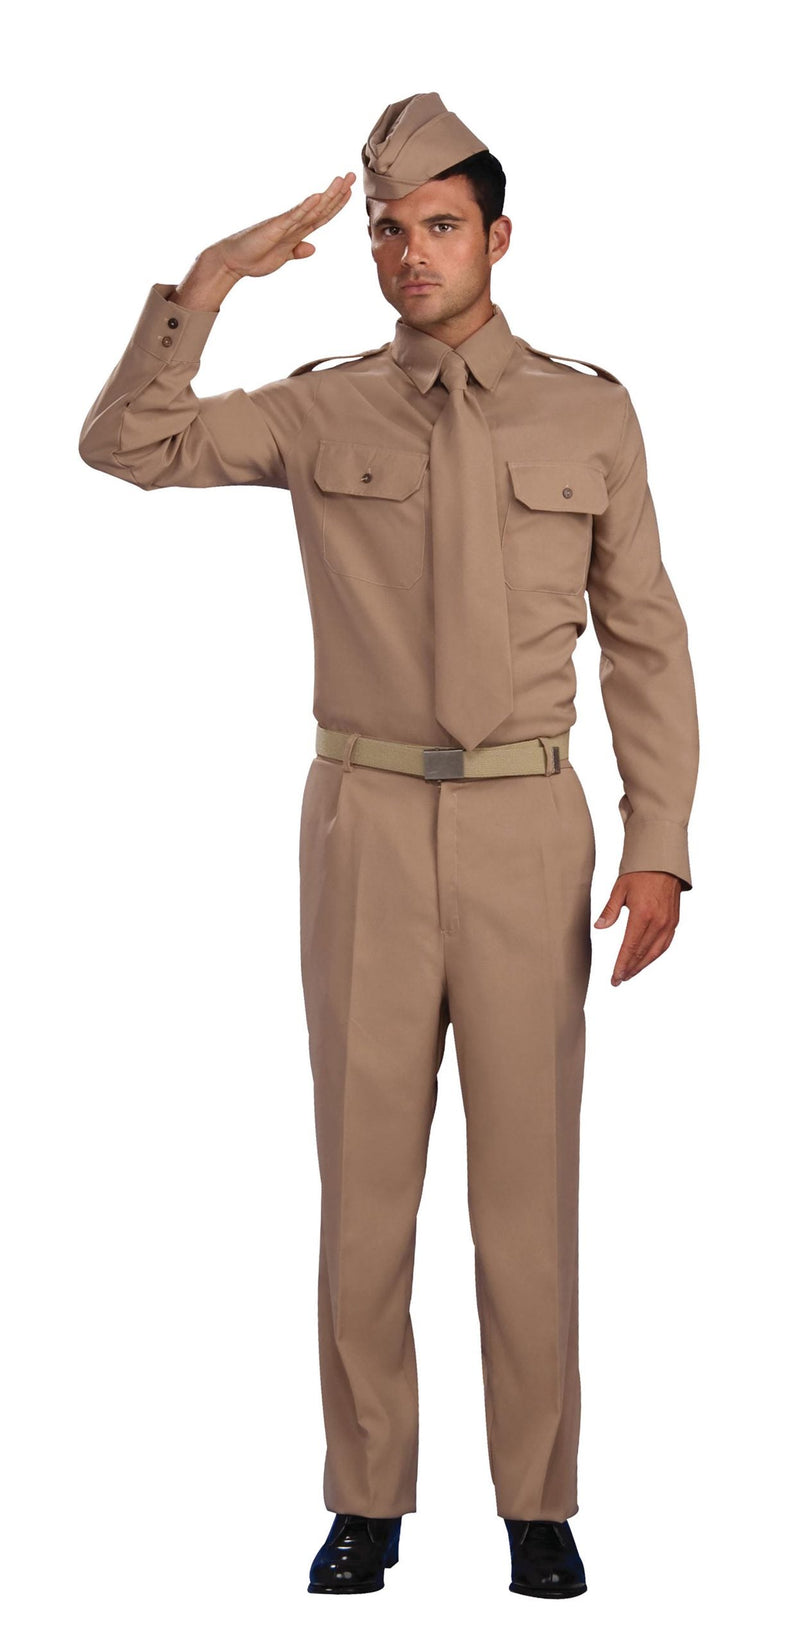 Mens WW2 Private Soldier Adult Costume Male Halloween_1 AC983